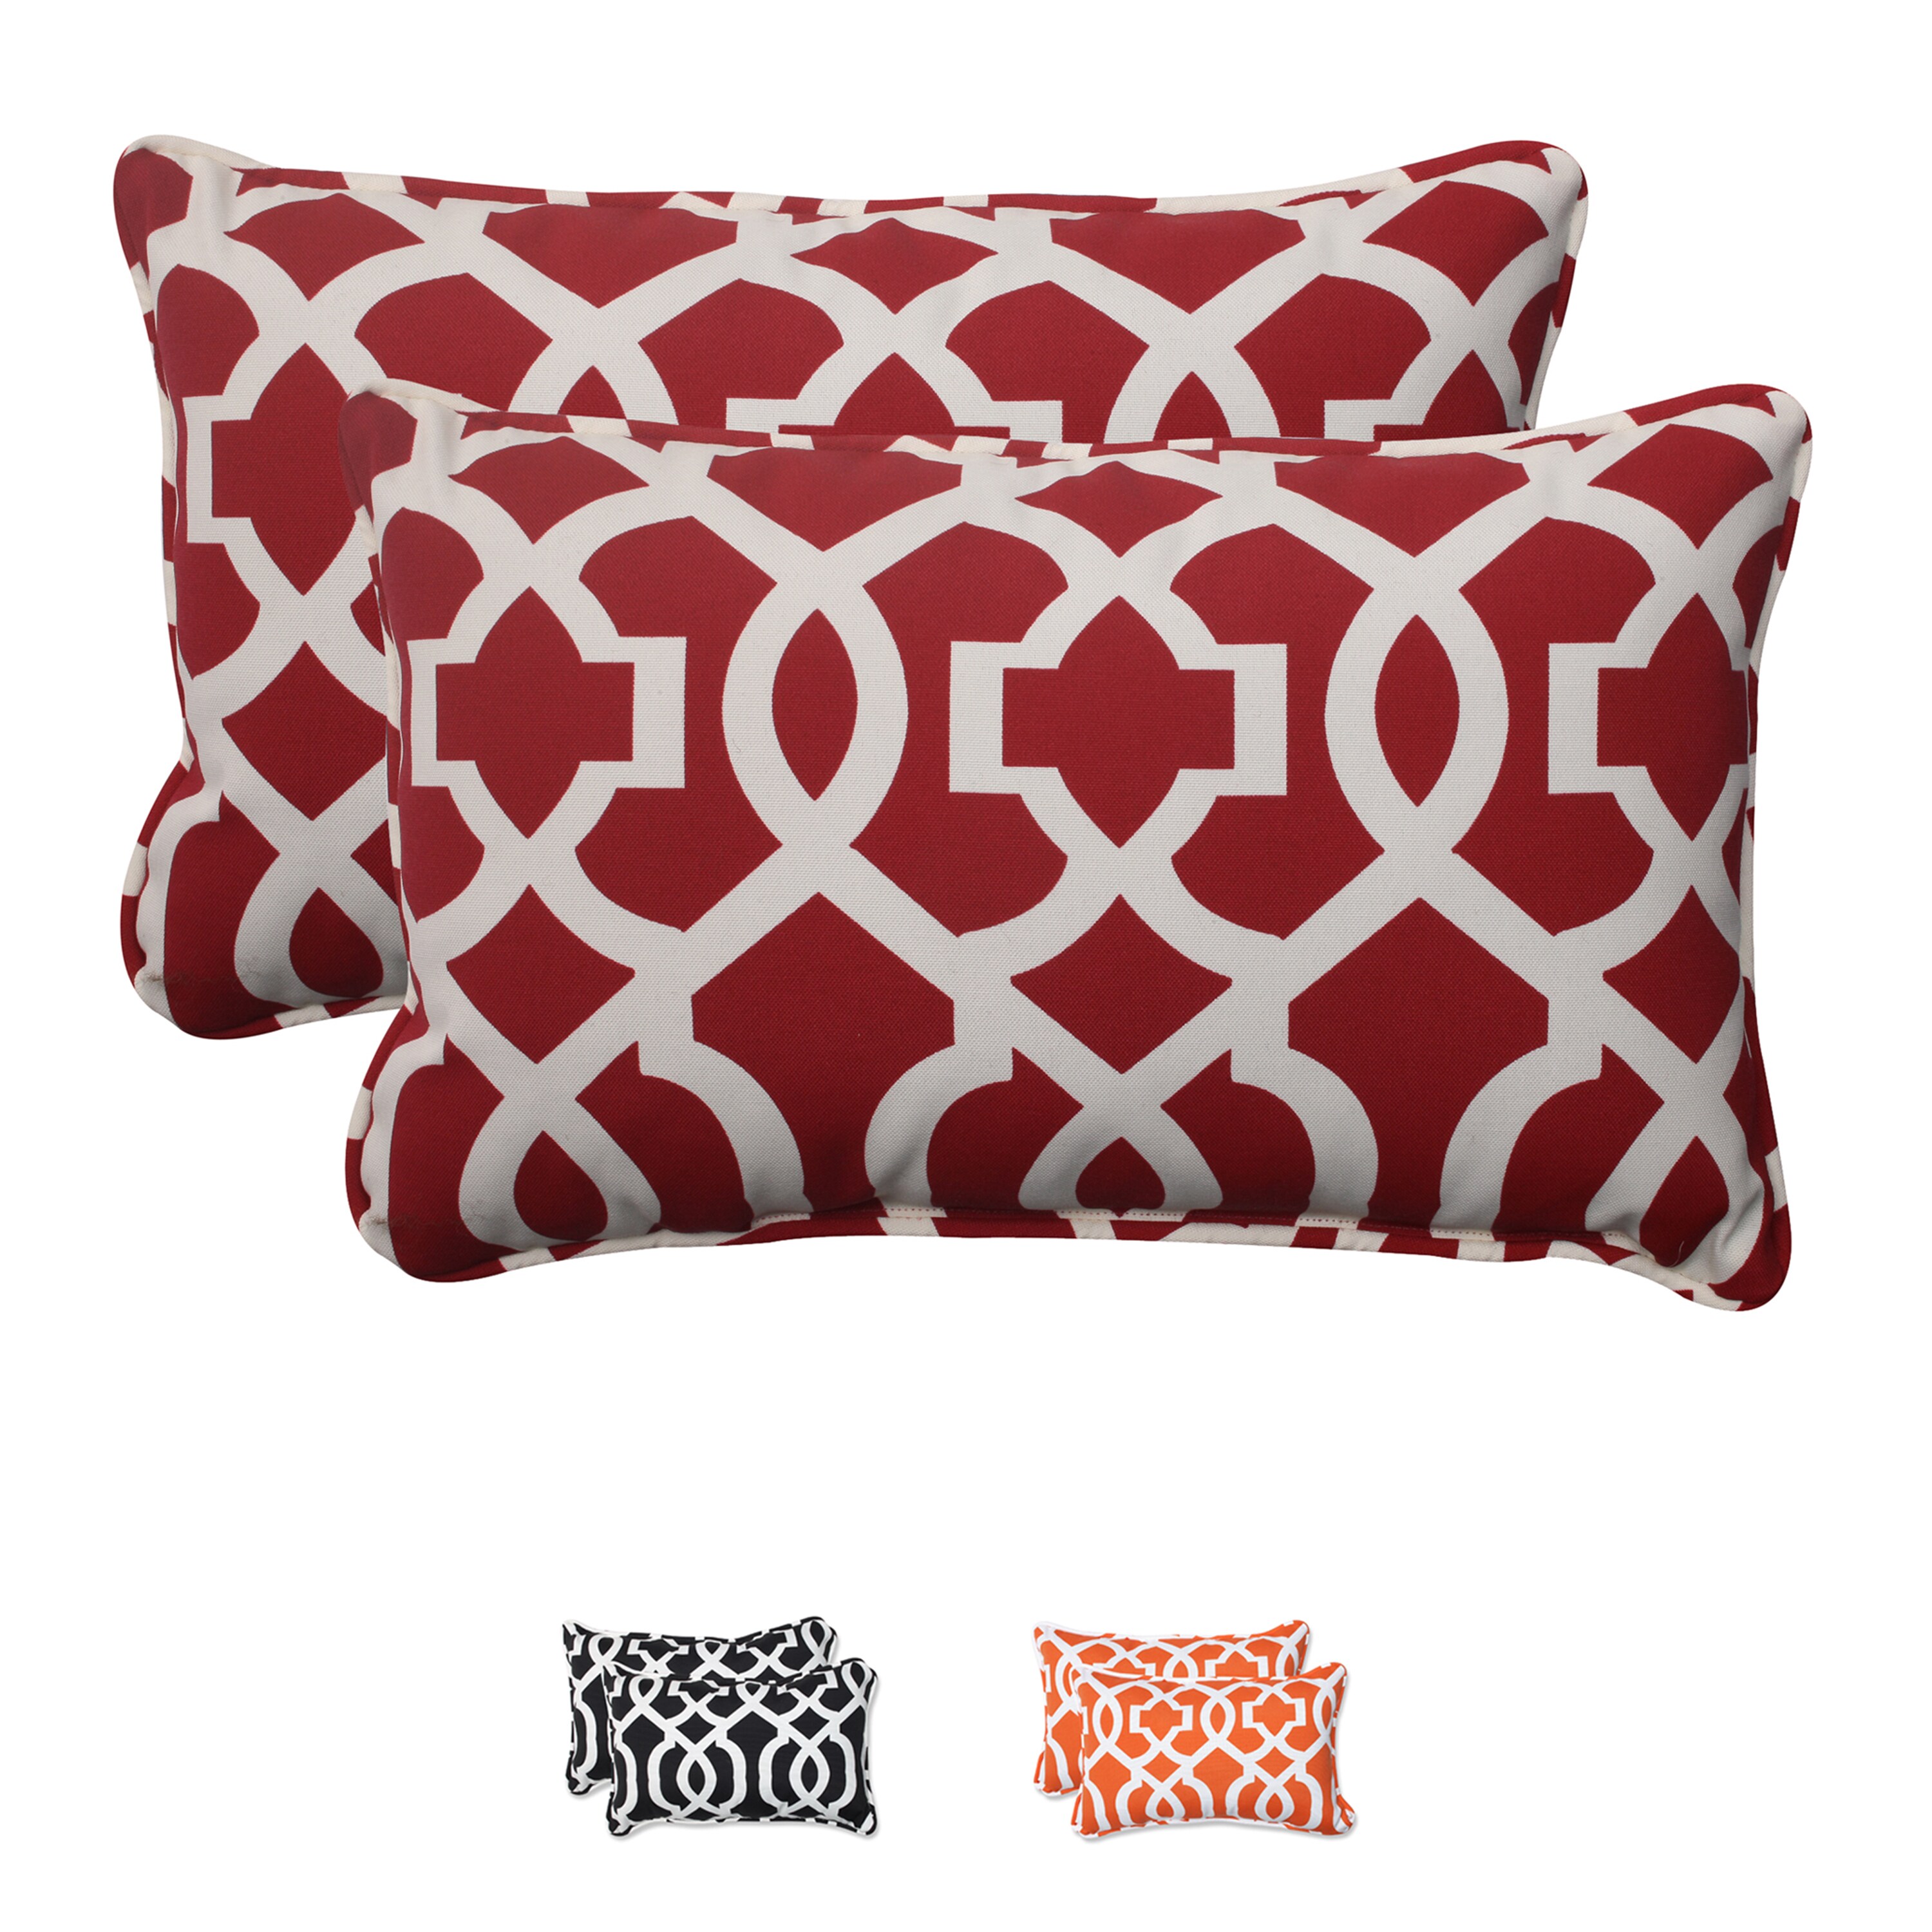 Comfort Your Patio with Greendale Cushions This Year